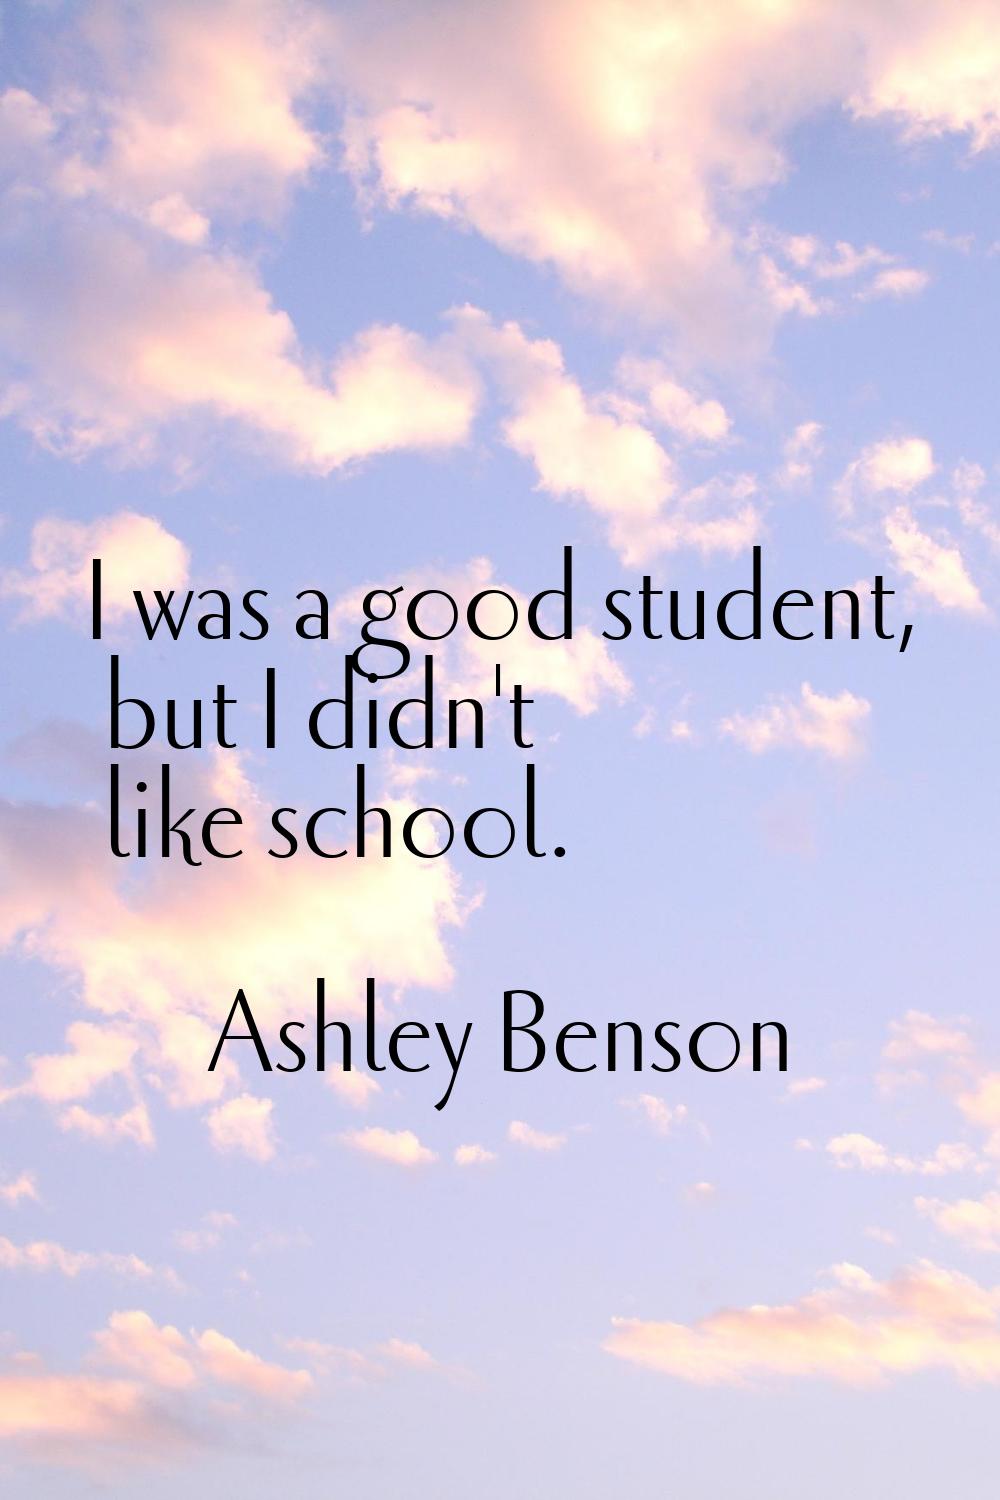 I was a good student, but I didn't like school.